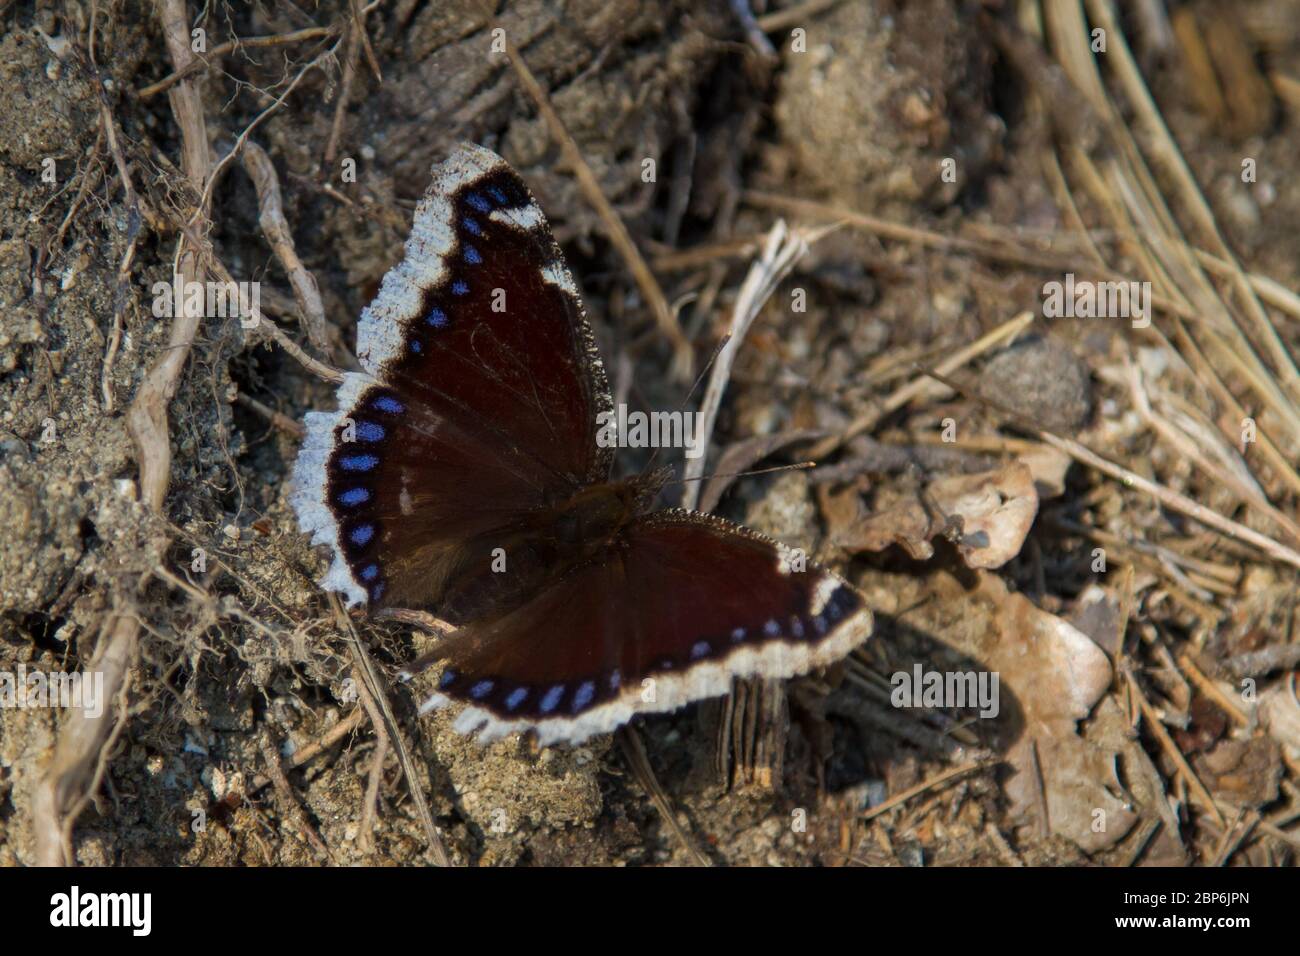 Nymphalis antiopa (Camberwell beauty butterfly / Trauermantel) Stock Photo